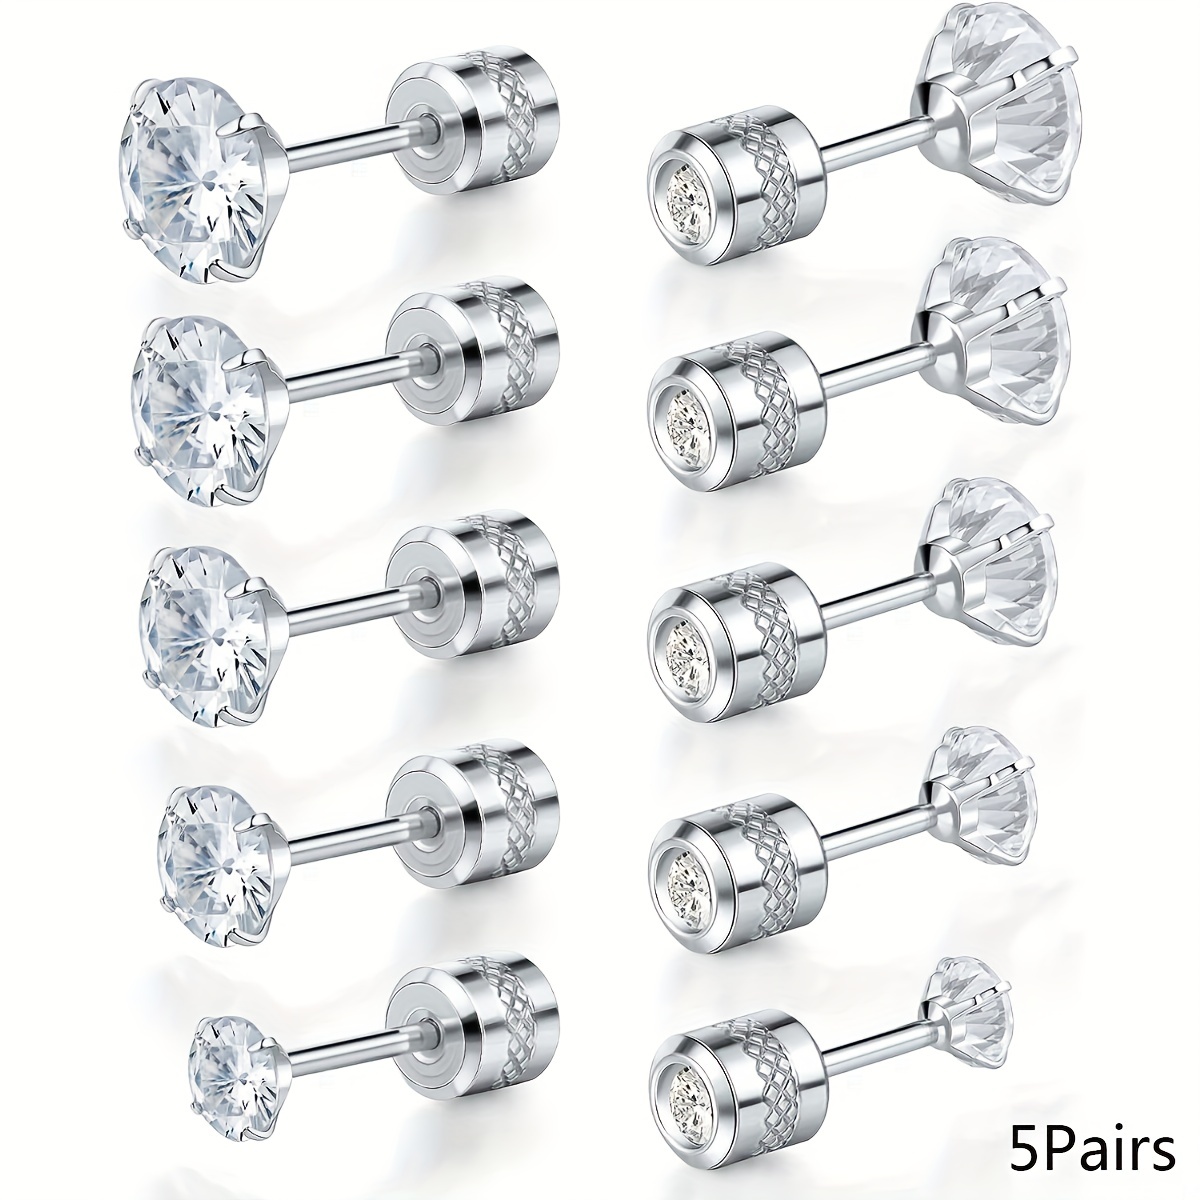 Stud Earrings for Women Mens Hypoallergenic Surgical Stainless Steel  Barbell Screw Flat Back Earrings 3mm Tiny Dainty Cubic Zirconia Inlaid Ear  Piercing Cartilage Tragus Helix Earring Studs (6 Pairs) 